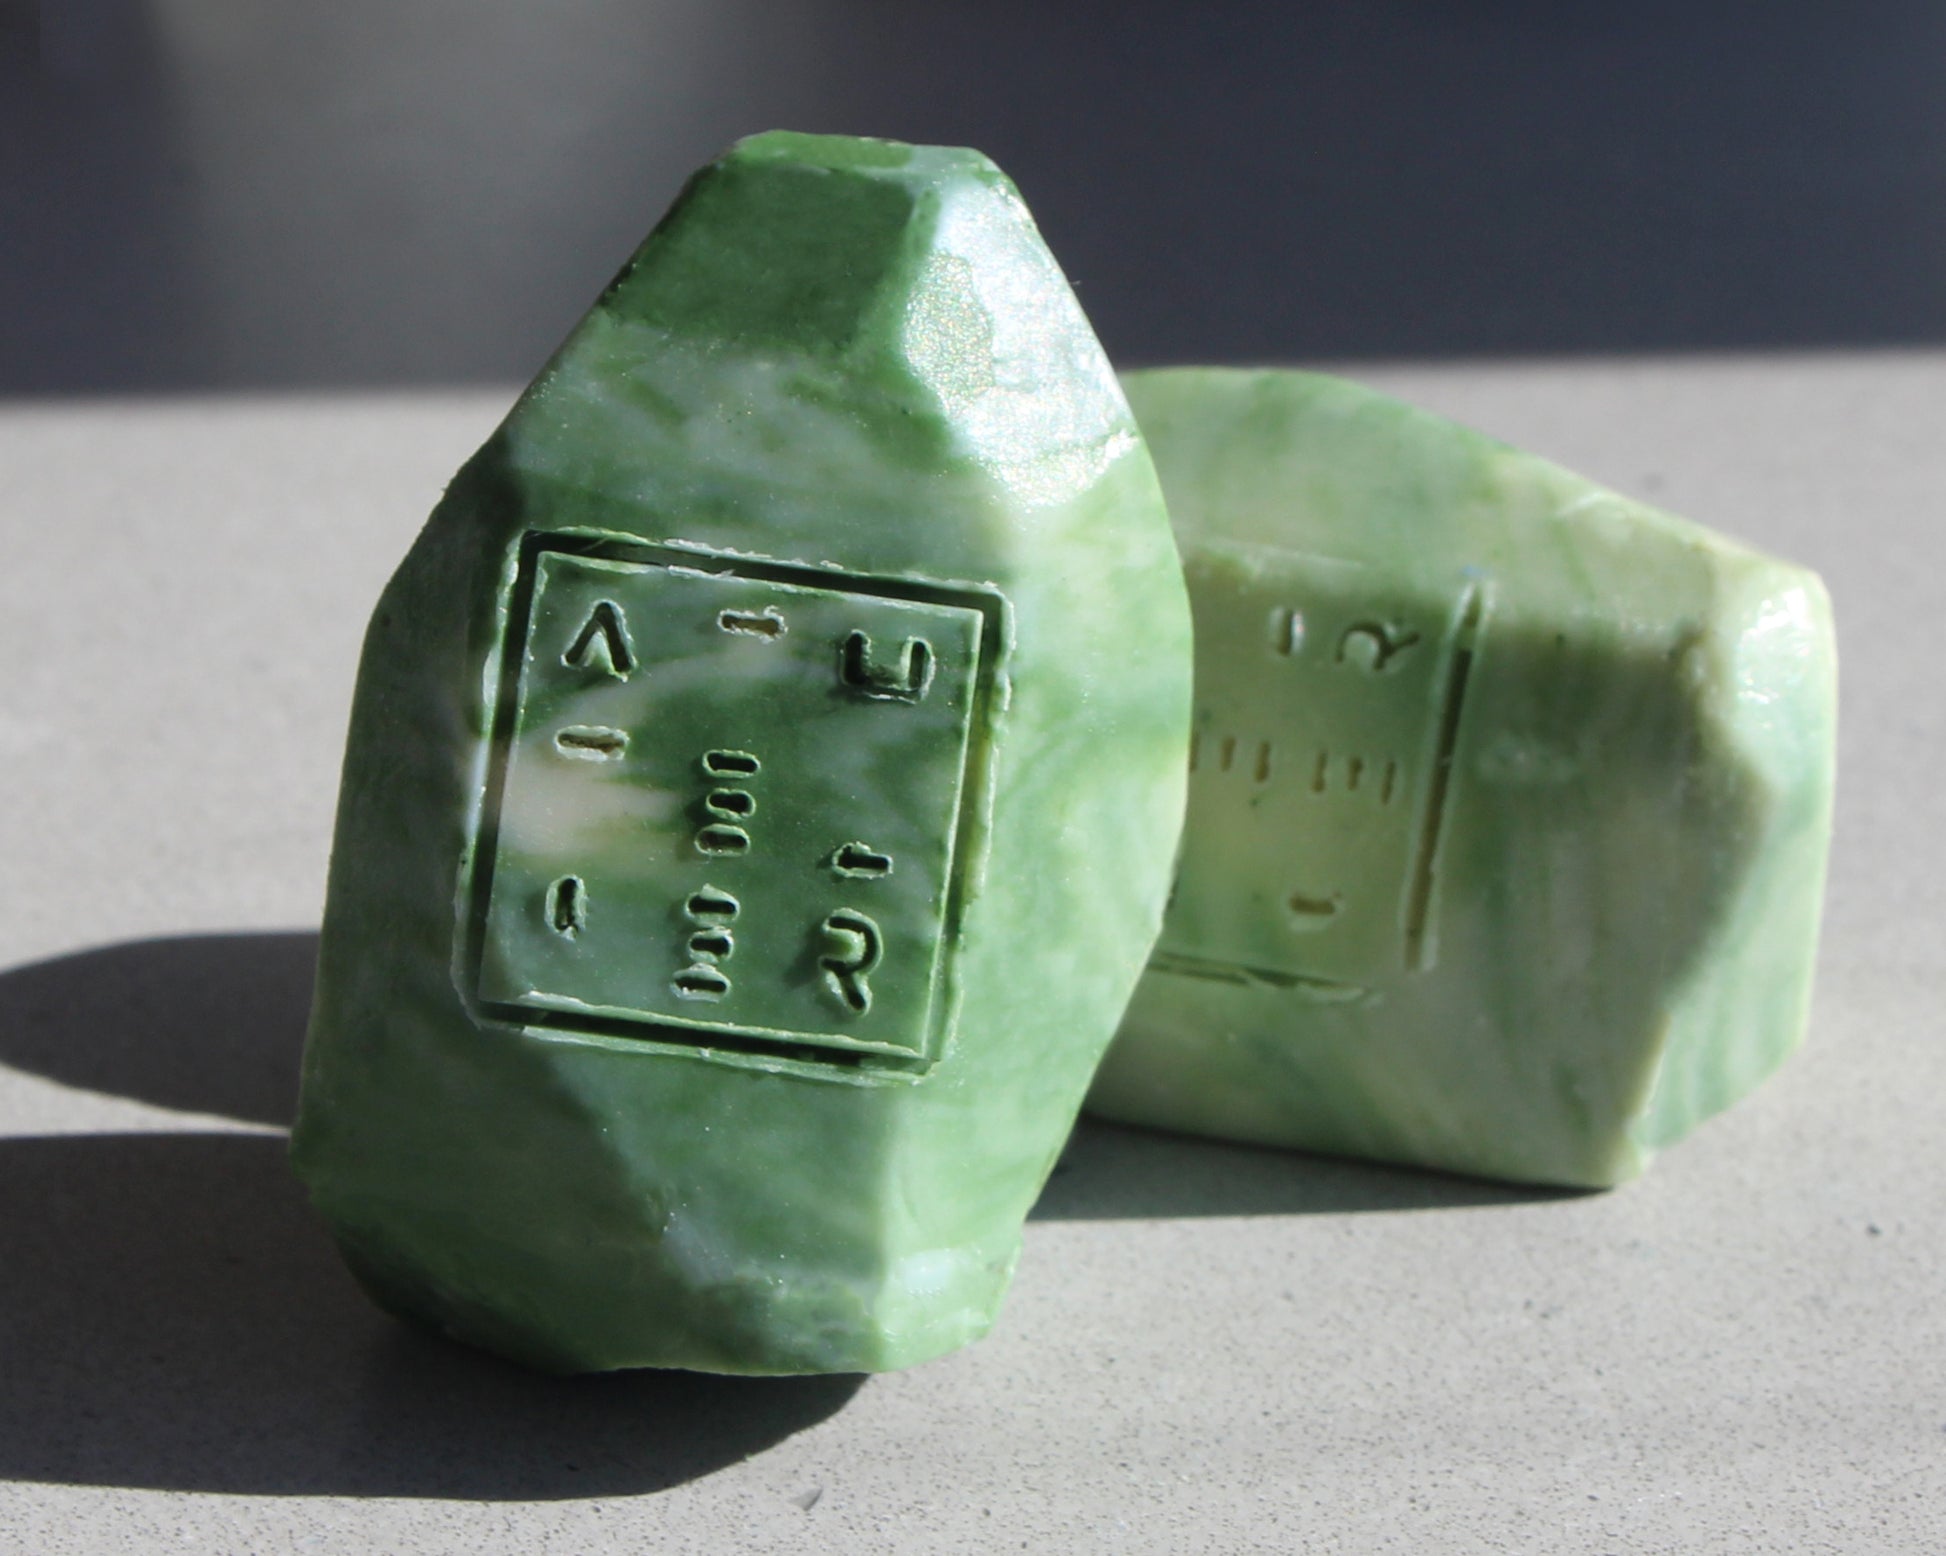 Green shampoo bars with embossed logo